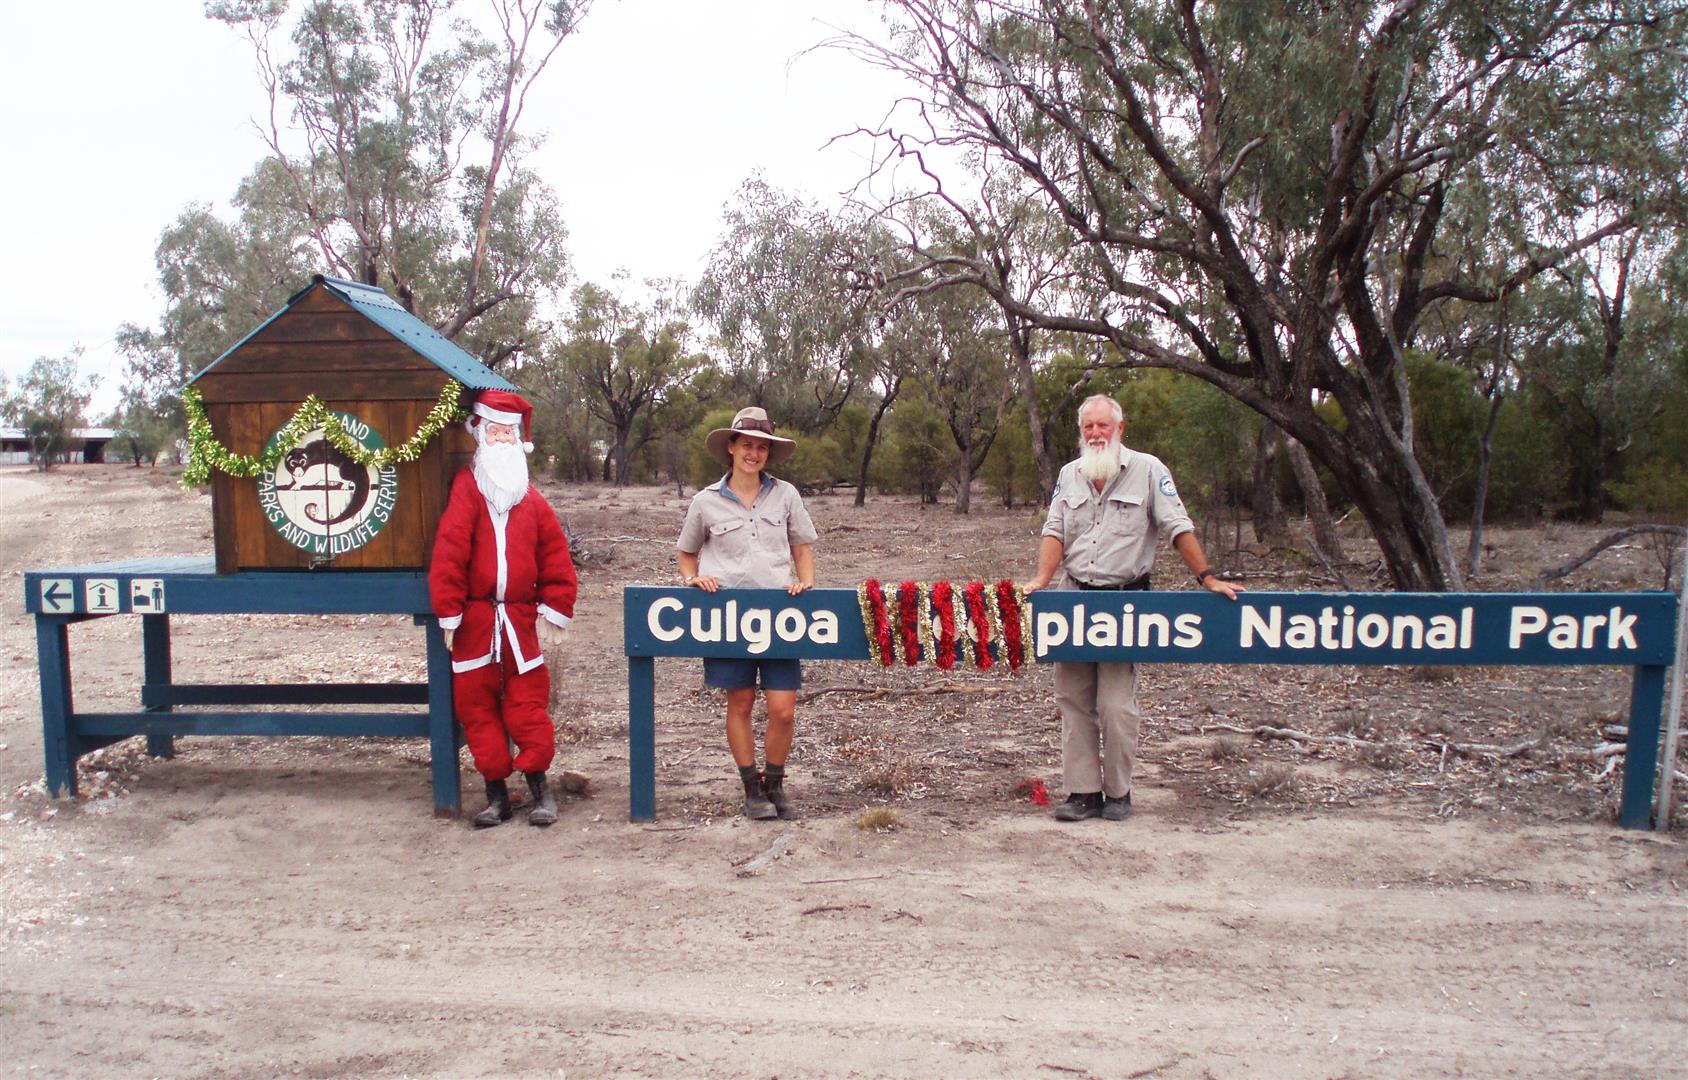 Queensland Parks and Wildlife Service Rangers Andy and Rowena, at a very dry Culgoa Floodplains National park, December 2014.